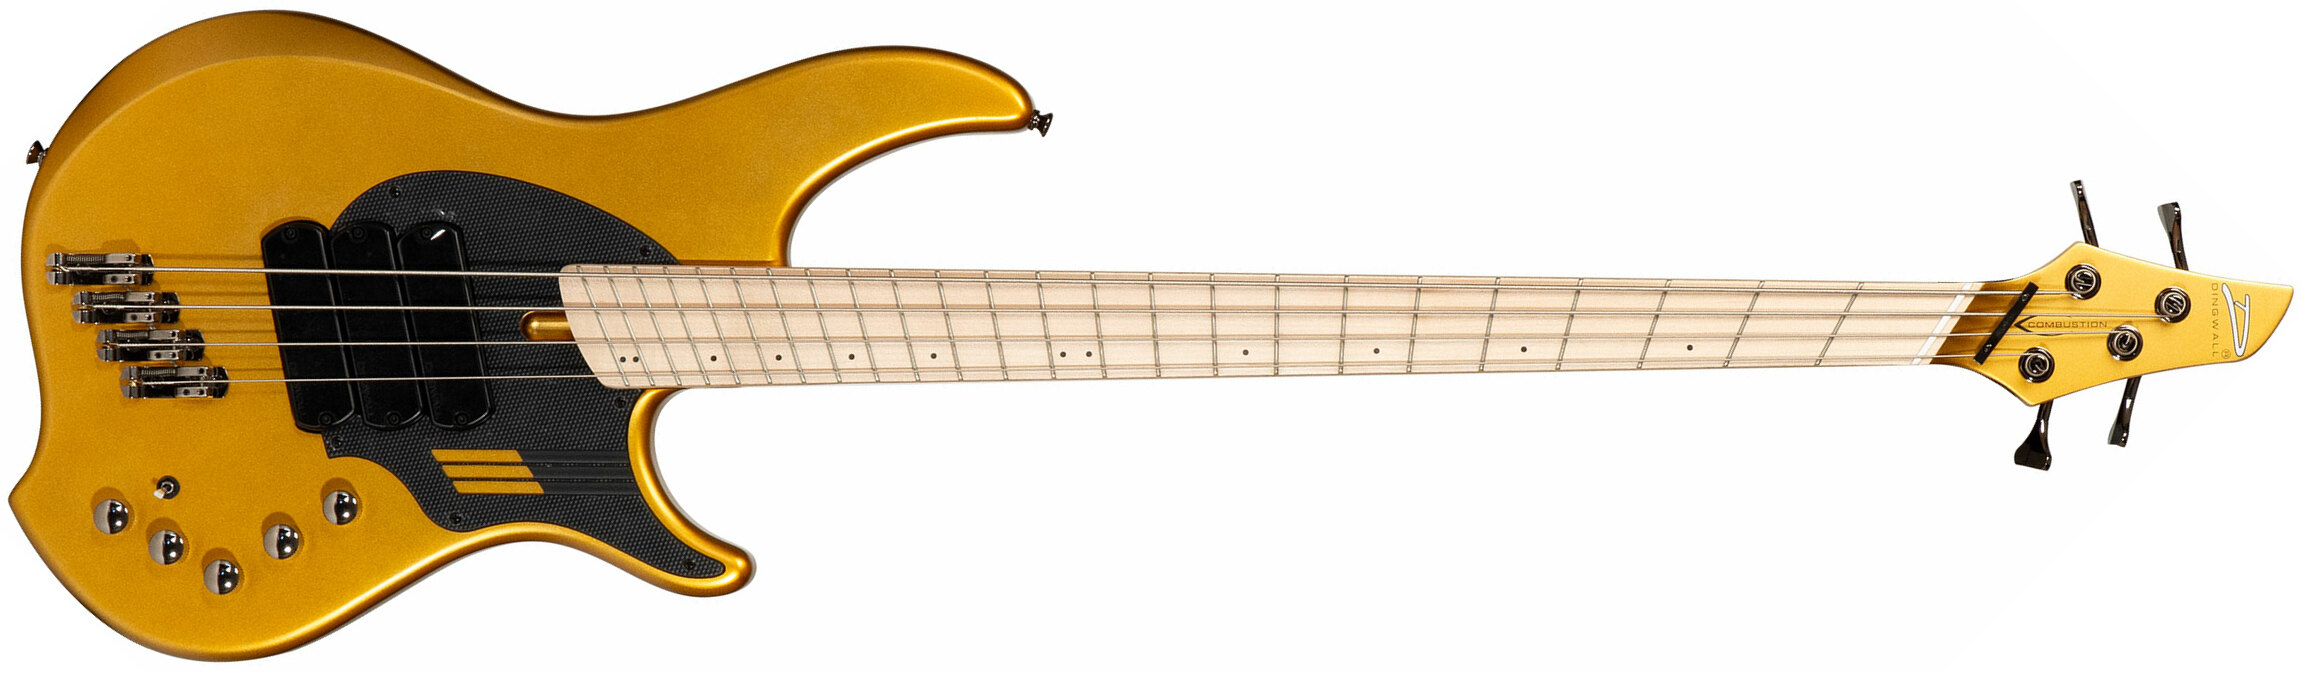 Dingwall Adam Nolly Getgood Ng3 4c Signature 3pu Active Mn - Gold Matte - Solid body electric bass - Main picture